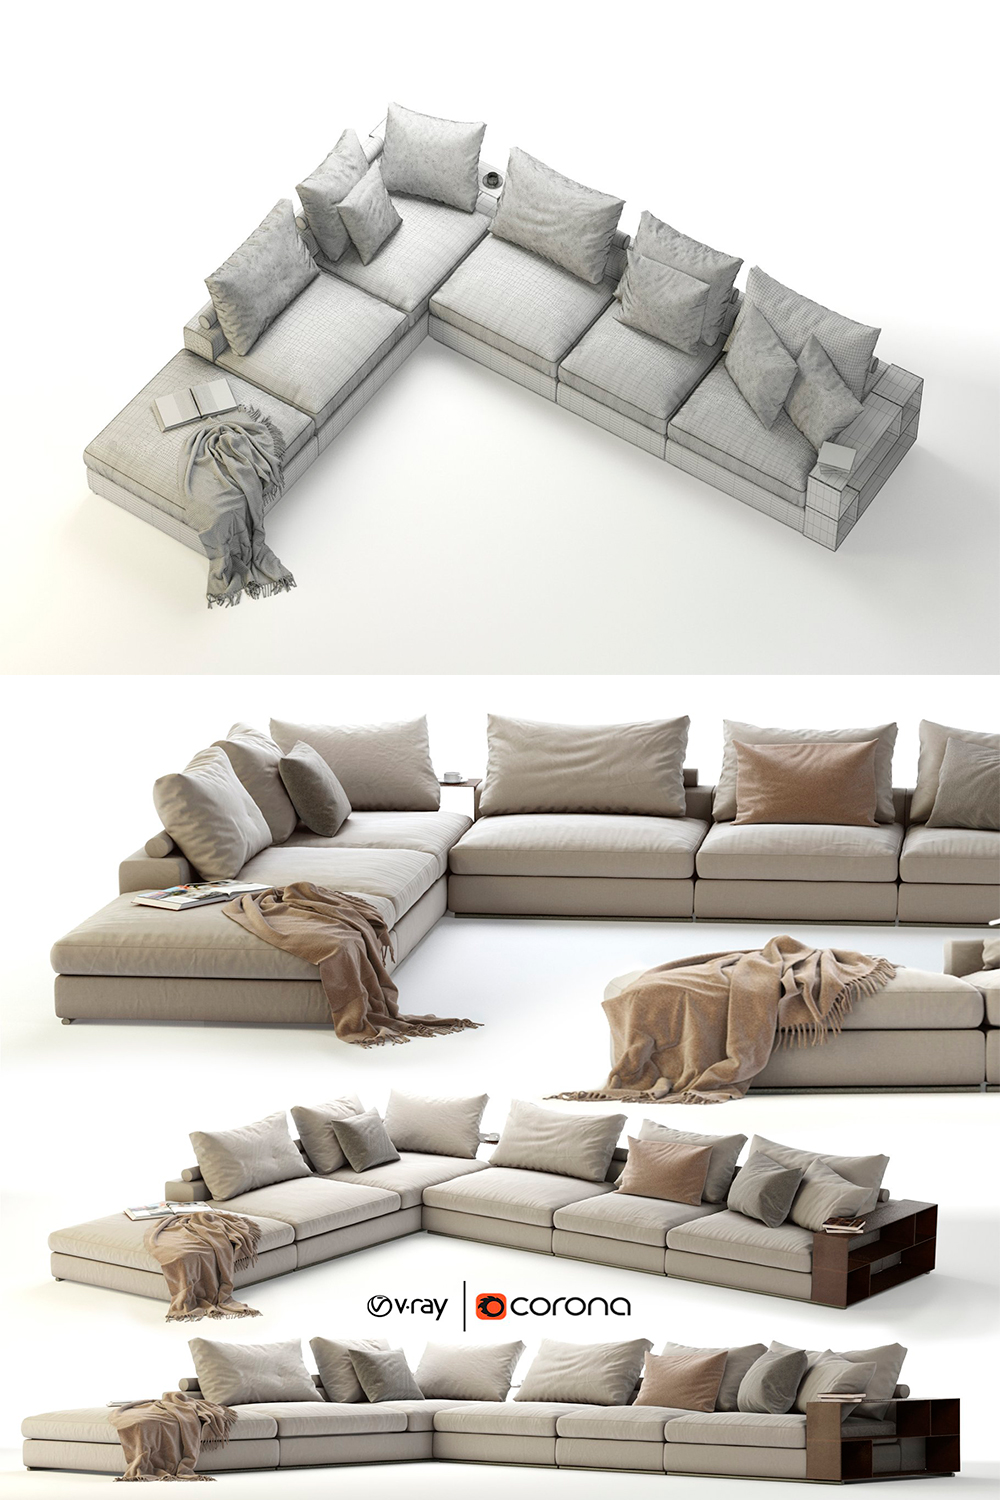 Images of a beautiful 3D model of a corner sectional from different angle